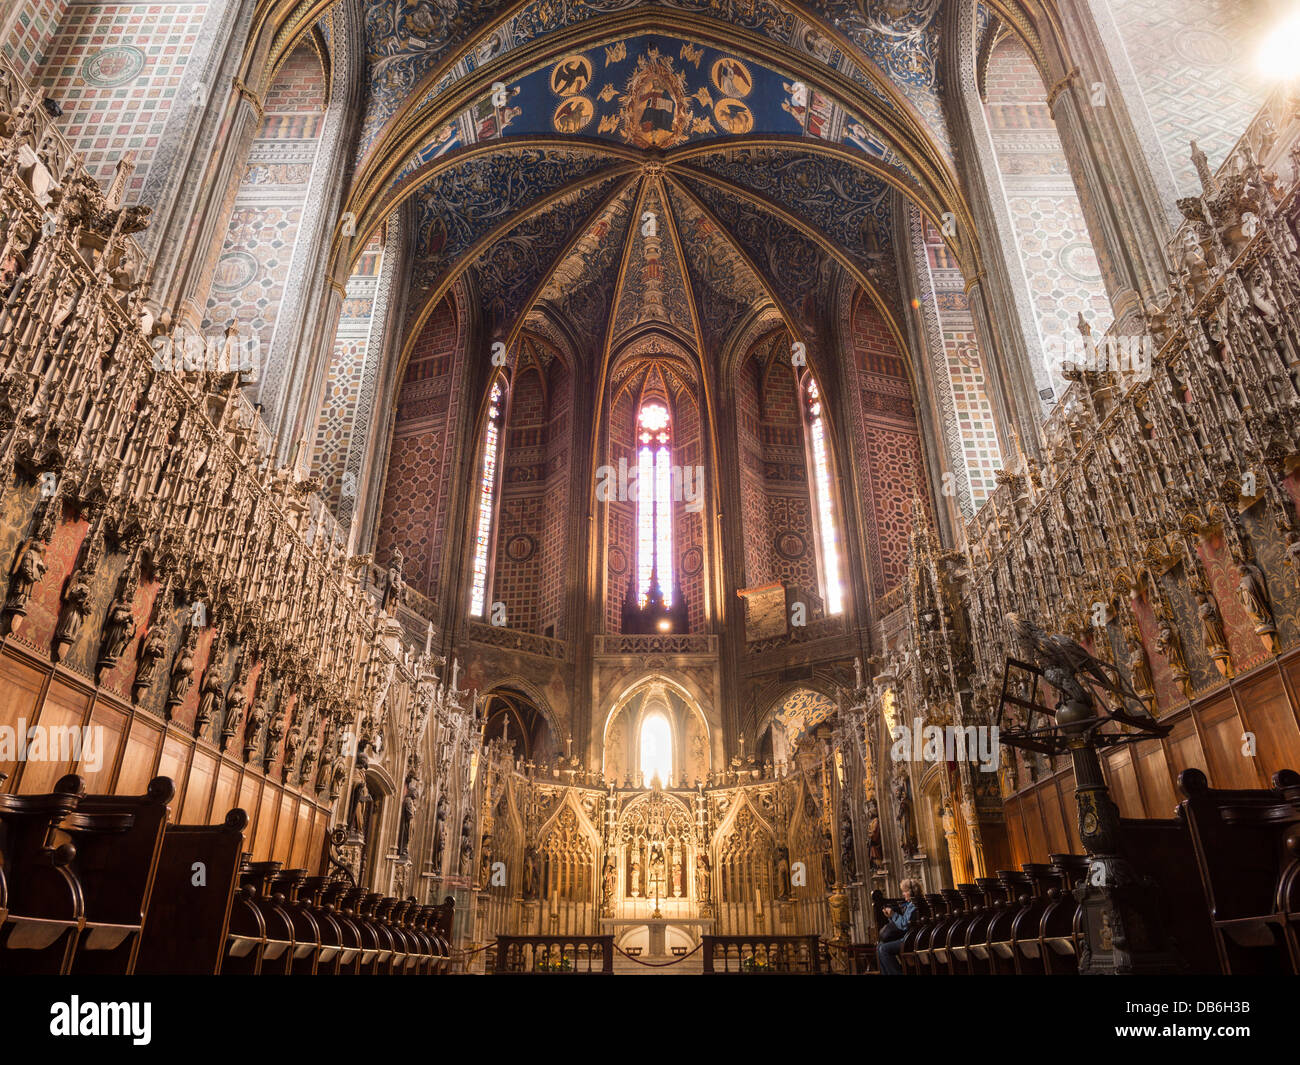 Choir and rear dome of the Cathedral. Detailed interior of the vast cathedral at Albi. A tourist takes one of the choir stalls Stock Photo